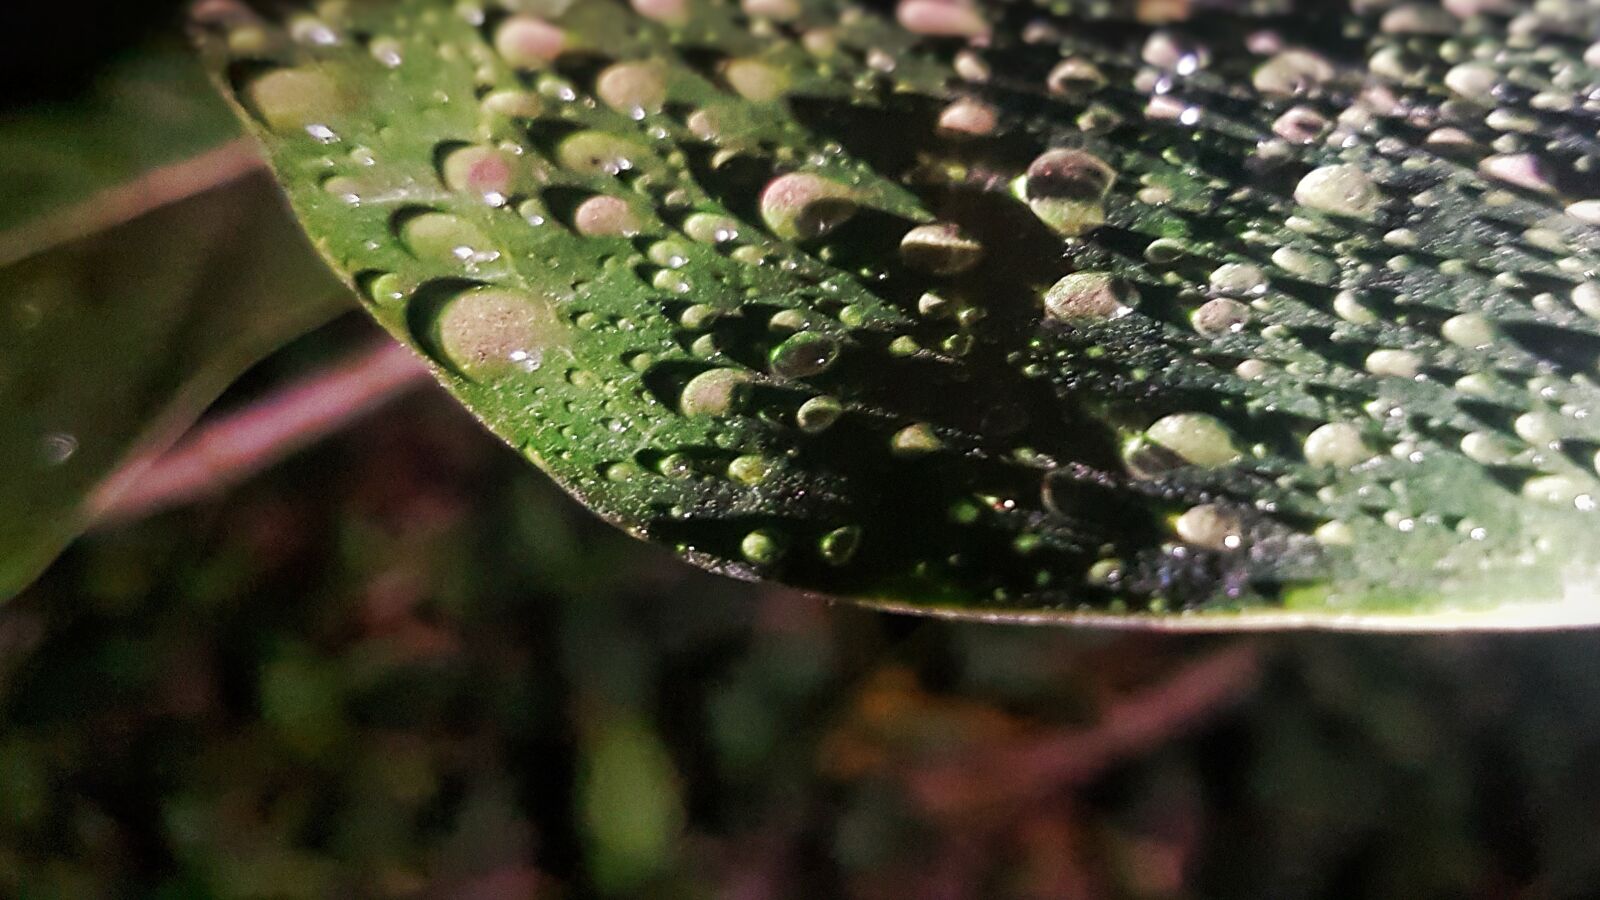 Samsung Galaxy S7 sample photo. Night, water droplets, leaf photography